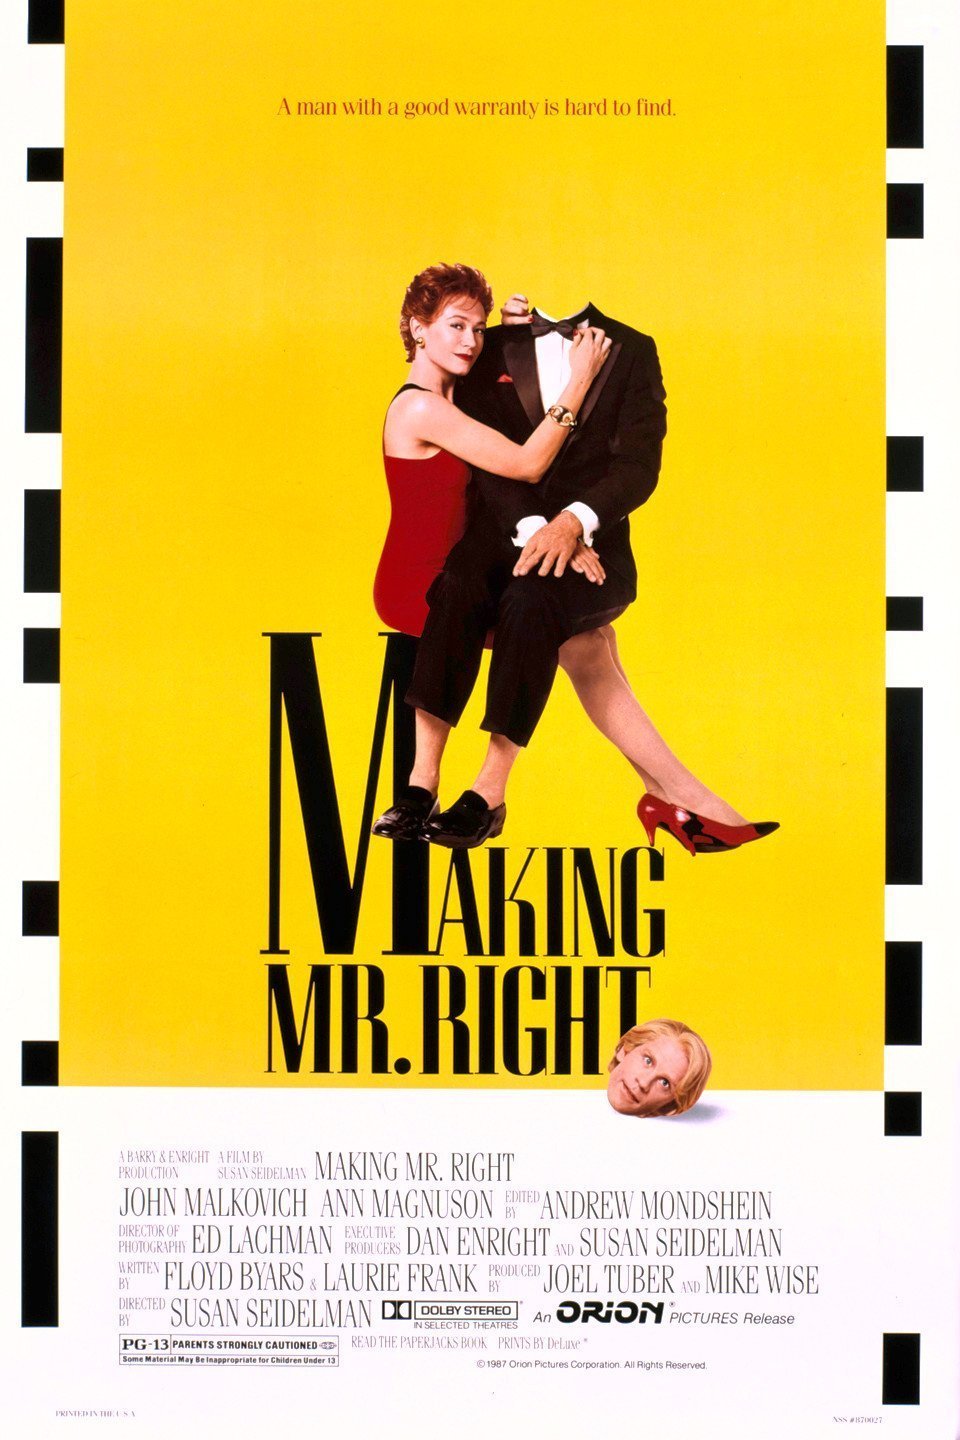 Poster of the movie Making Mr. Right